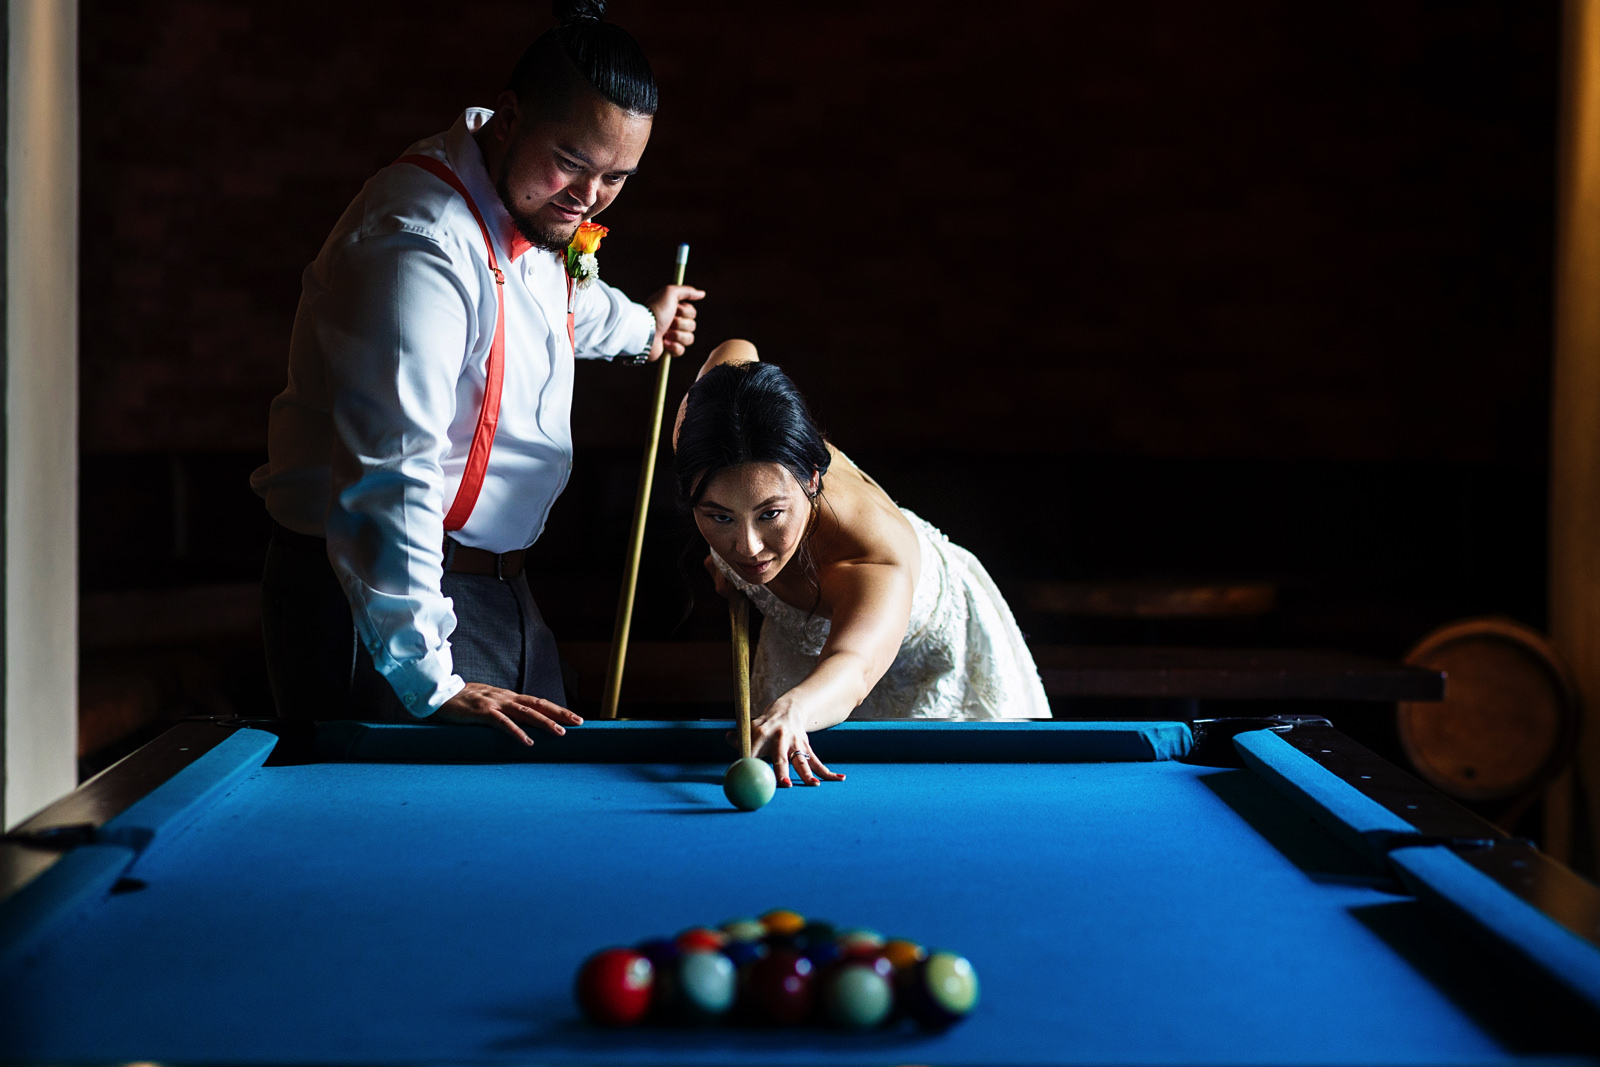 Bride and groom playing table pool